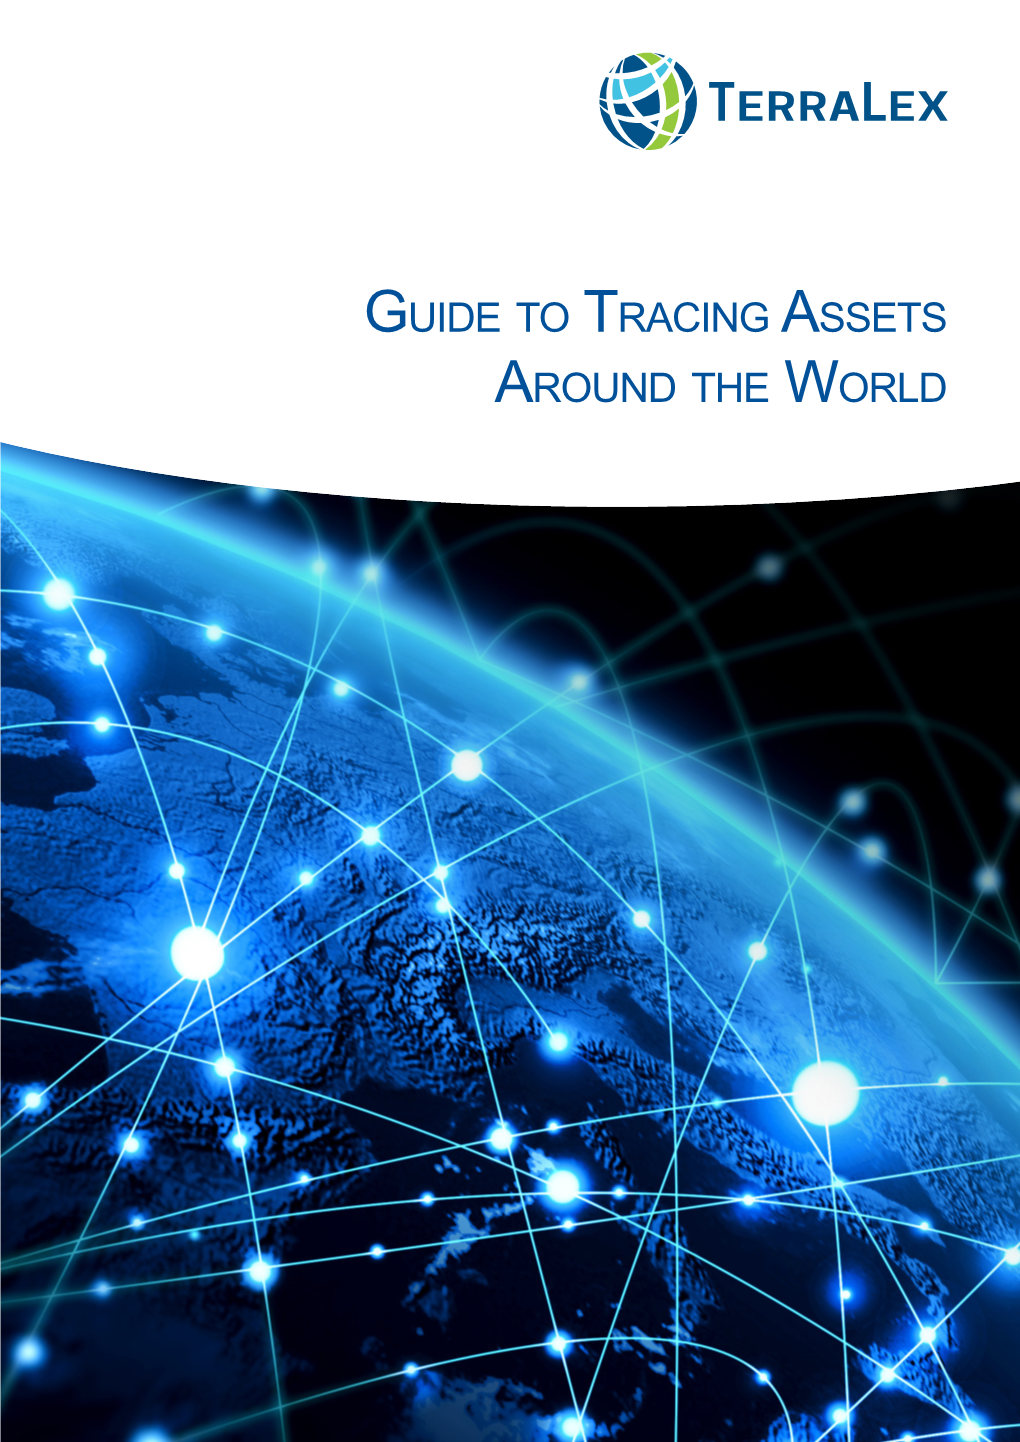 Terralex's Guide to Tracing Assets Around the World